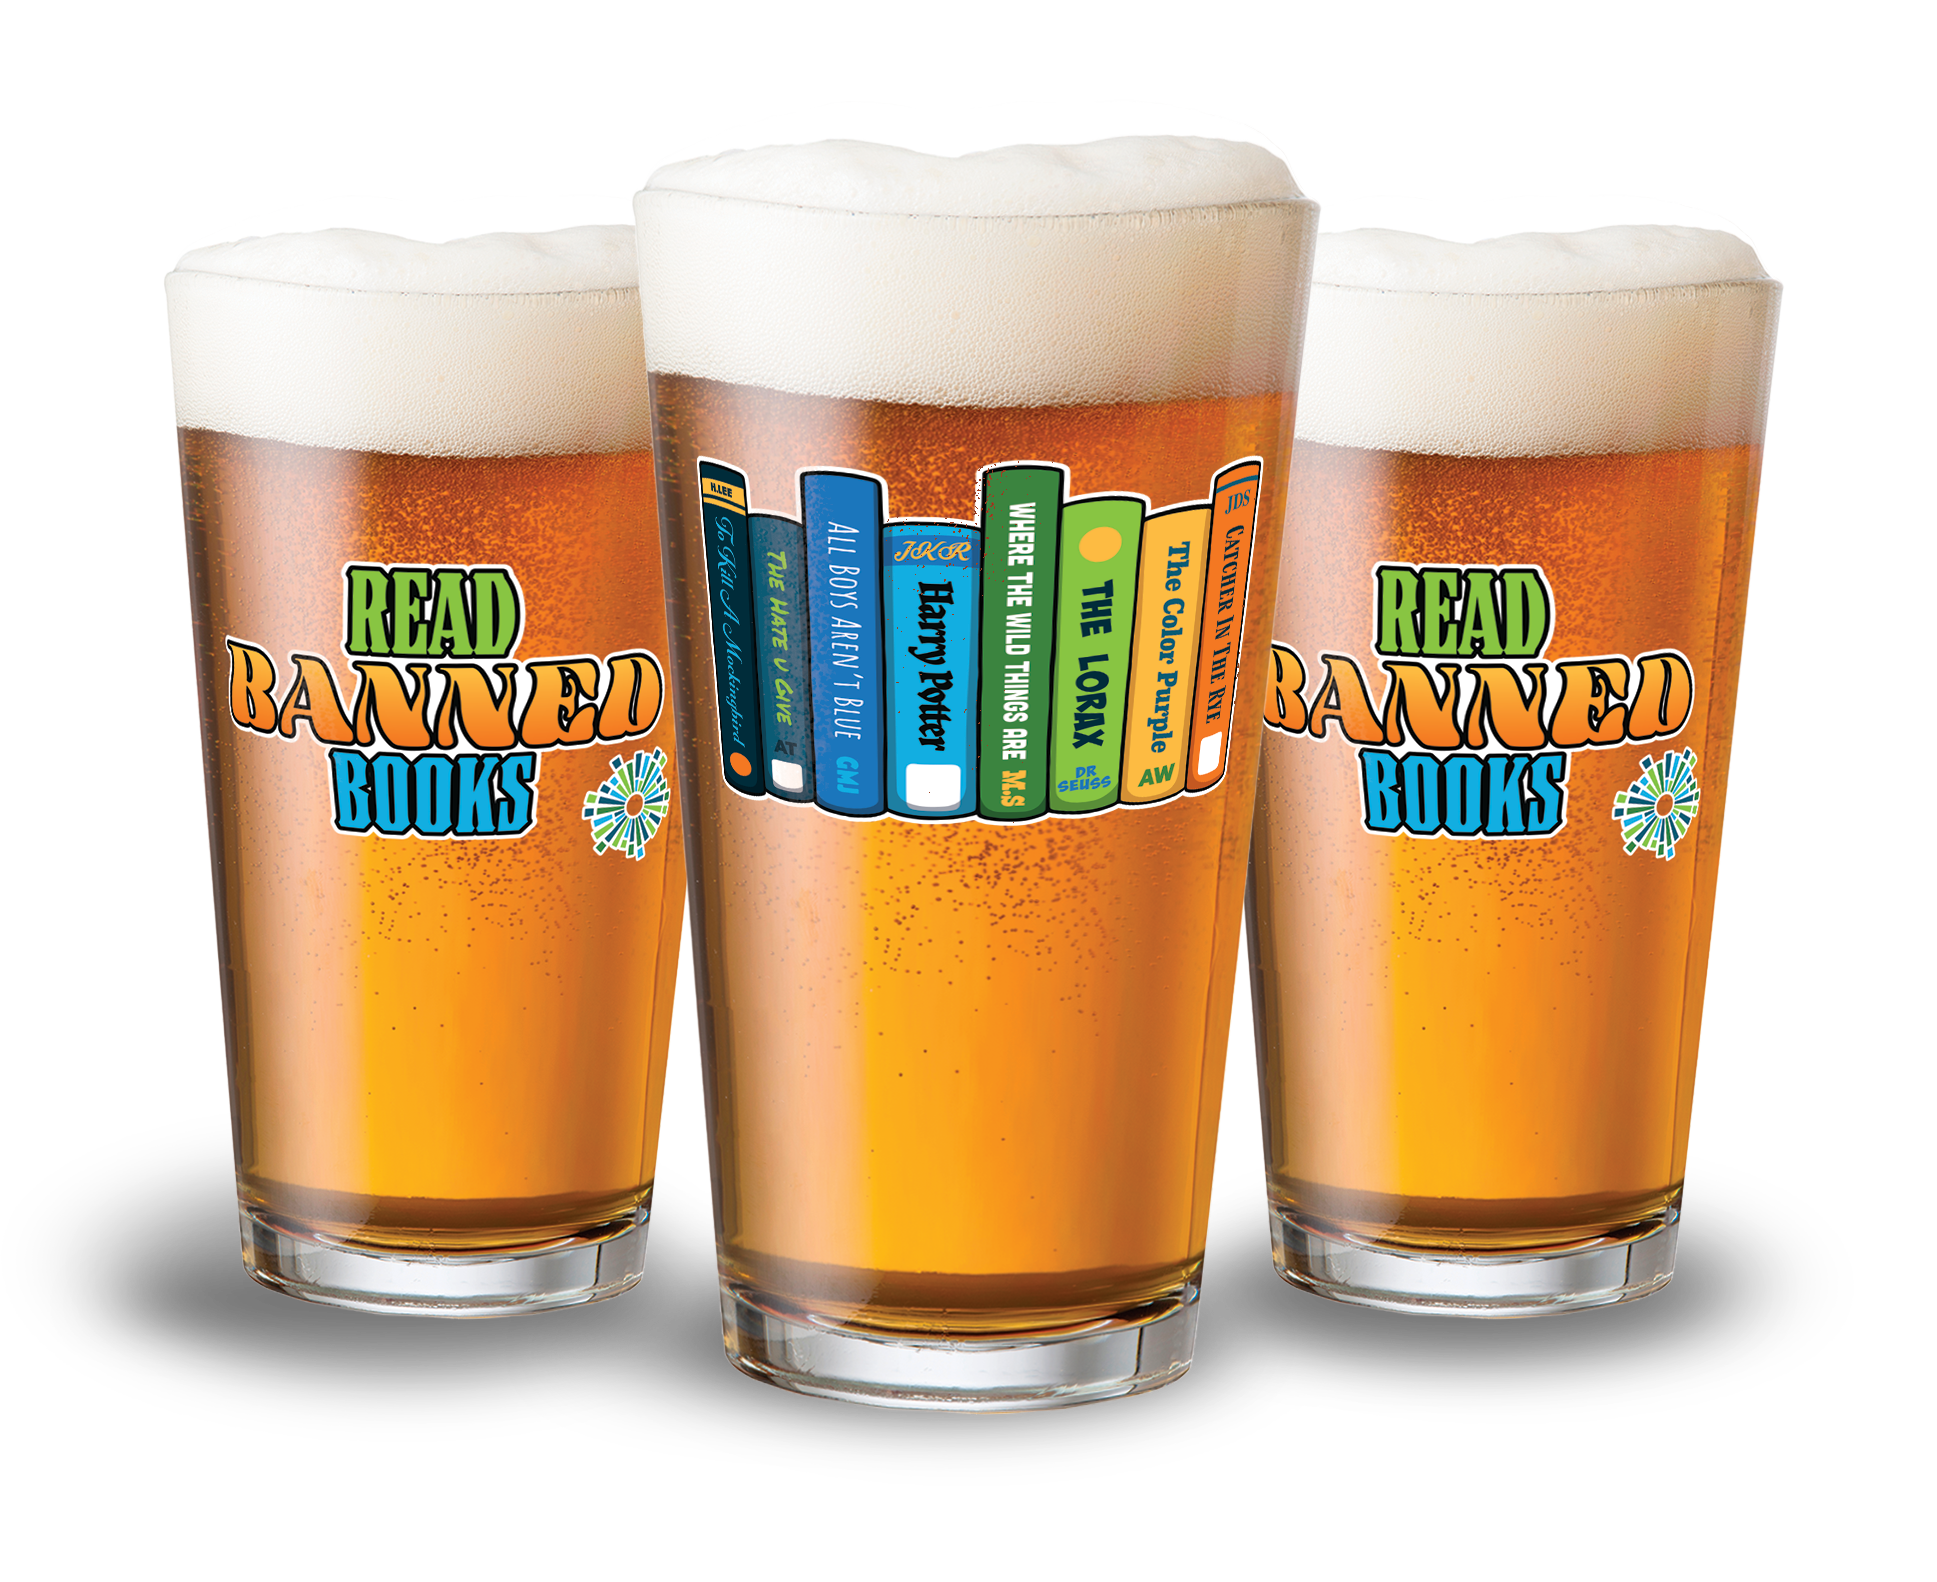 Image of three glasses of beer with designs that say "READ BANNED BOOKS" and have book images on them.